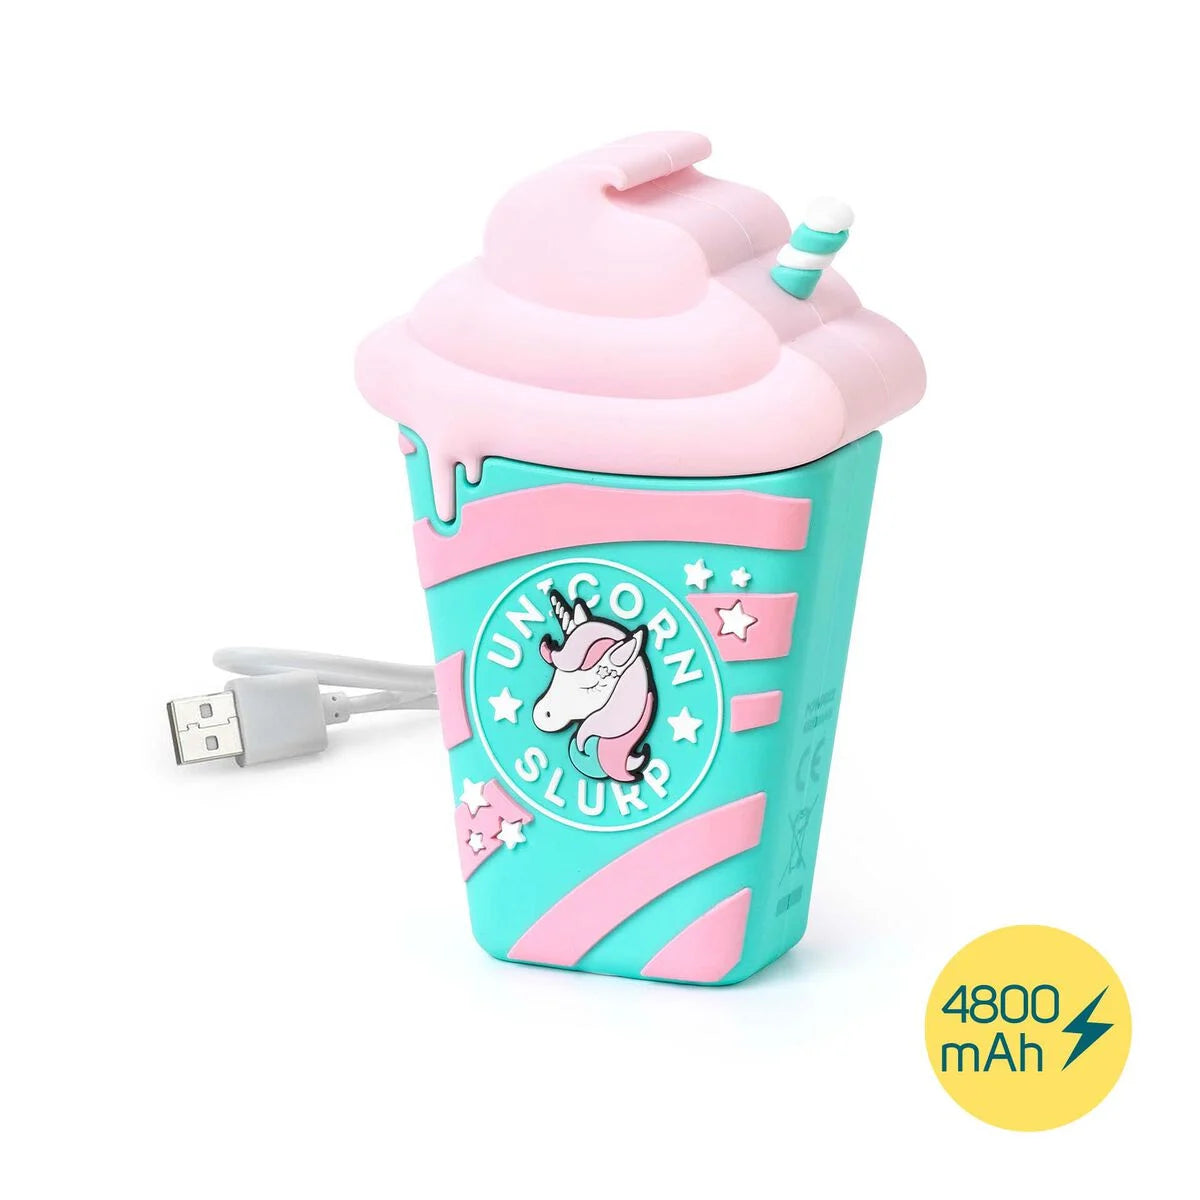 Fab Gifts | Legami Power Bank Unicorn by Weirs of Baggot Street